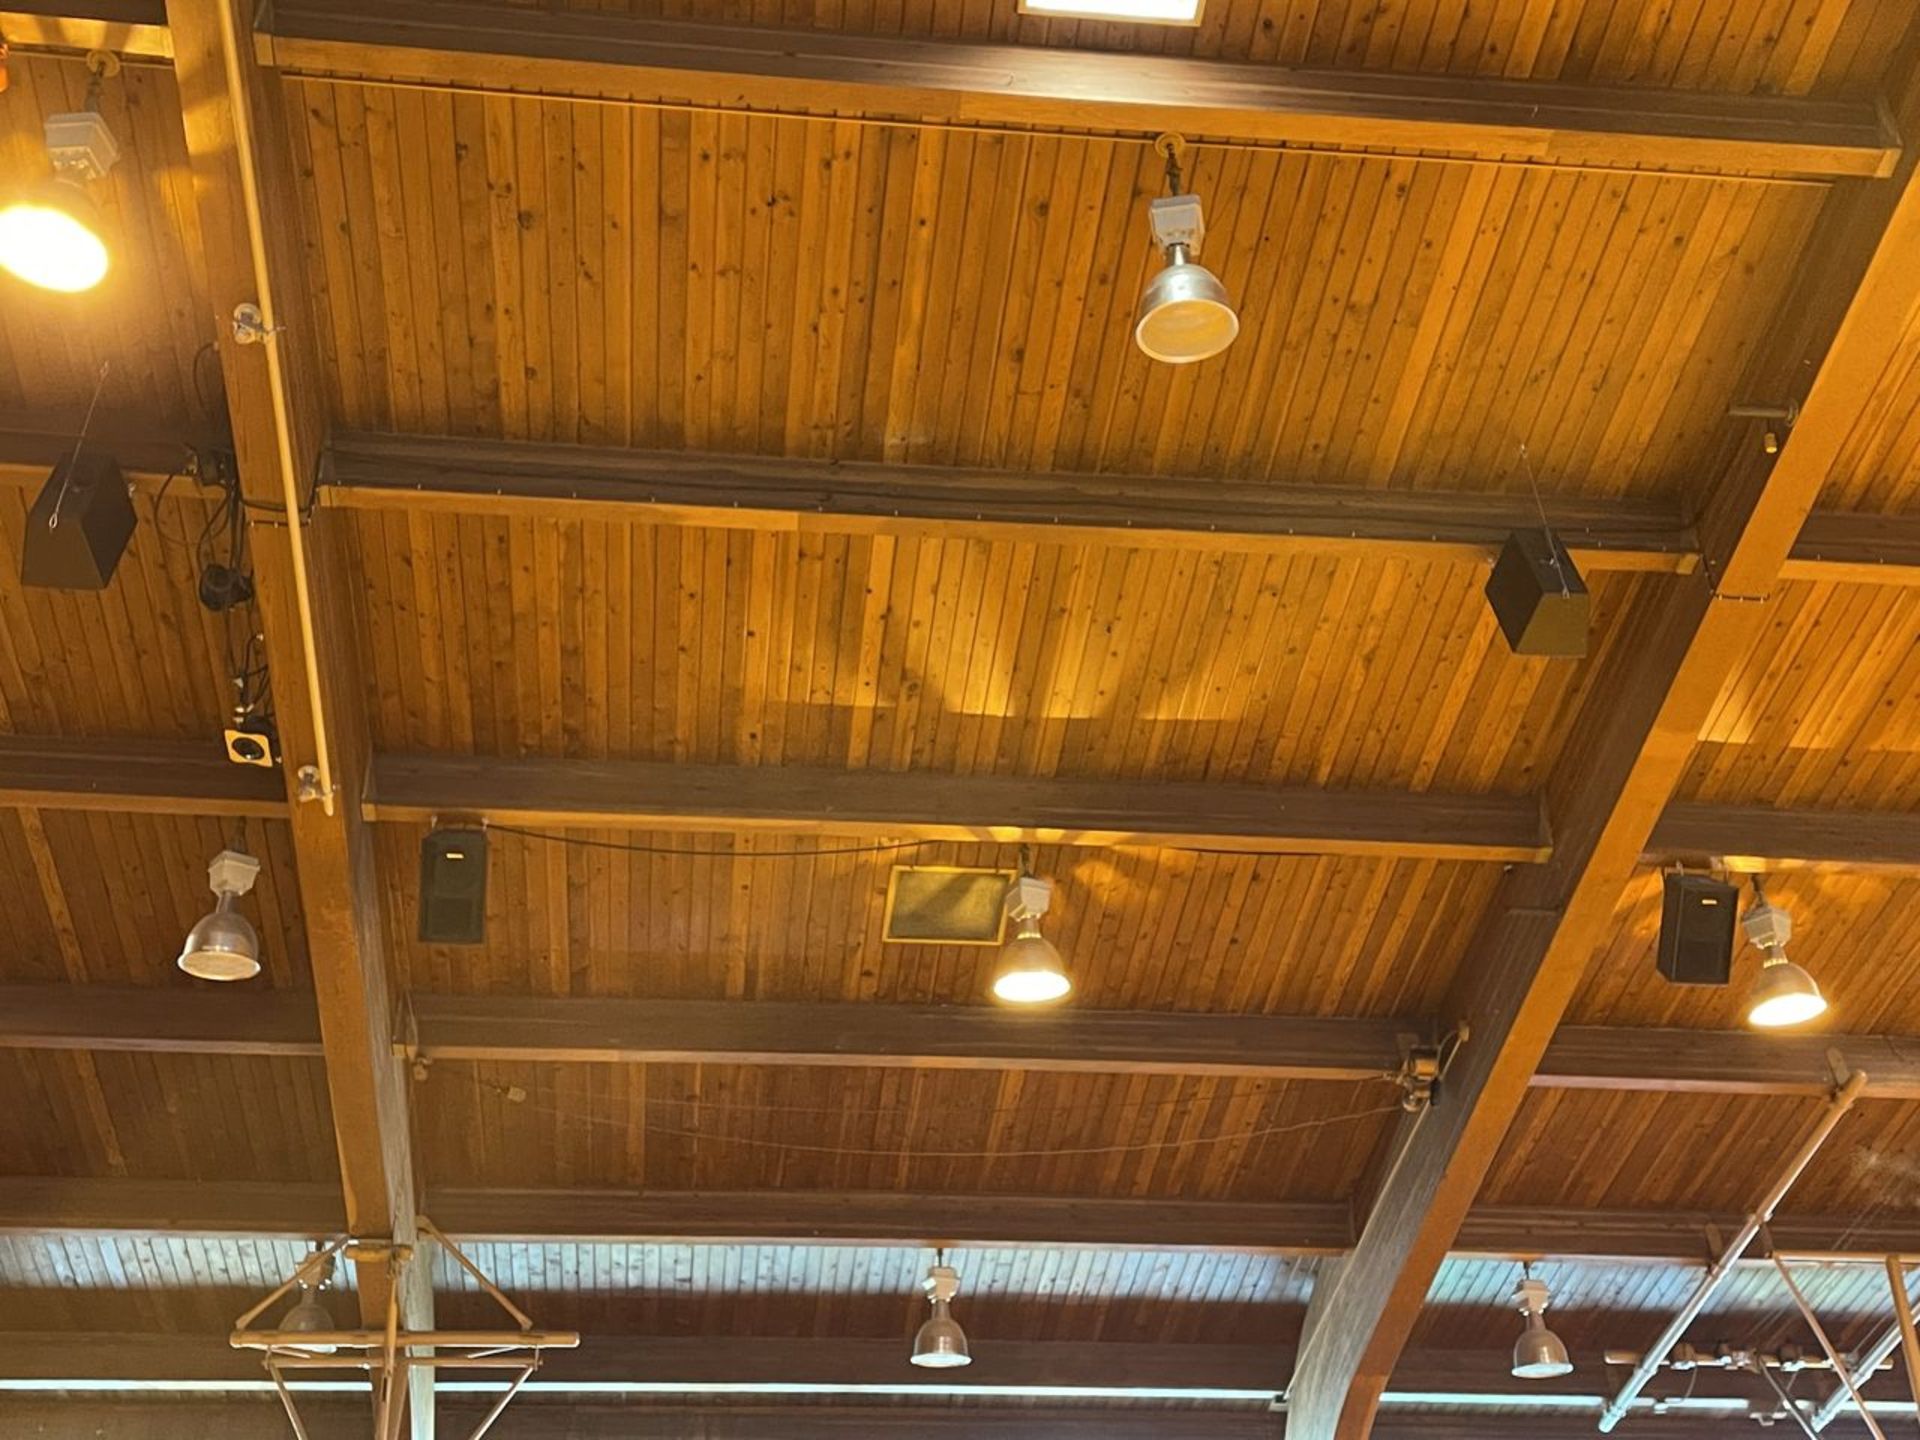 Sound System with (8) Speakers mounted in Ceiling (Gym) - Image 2 of 3